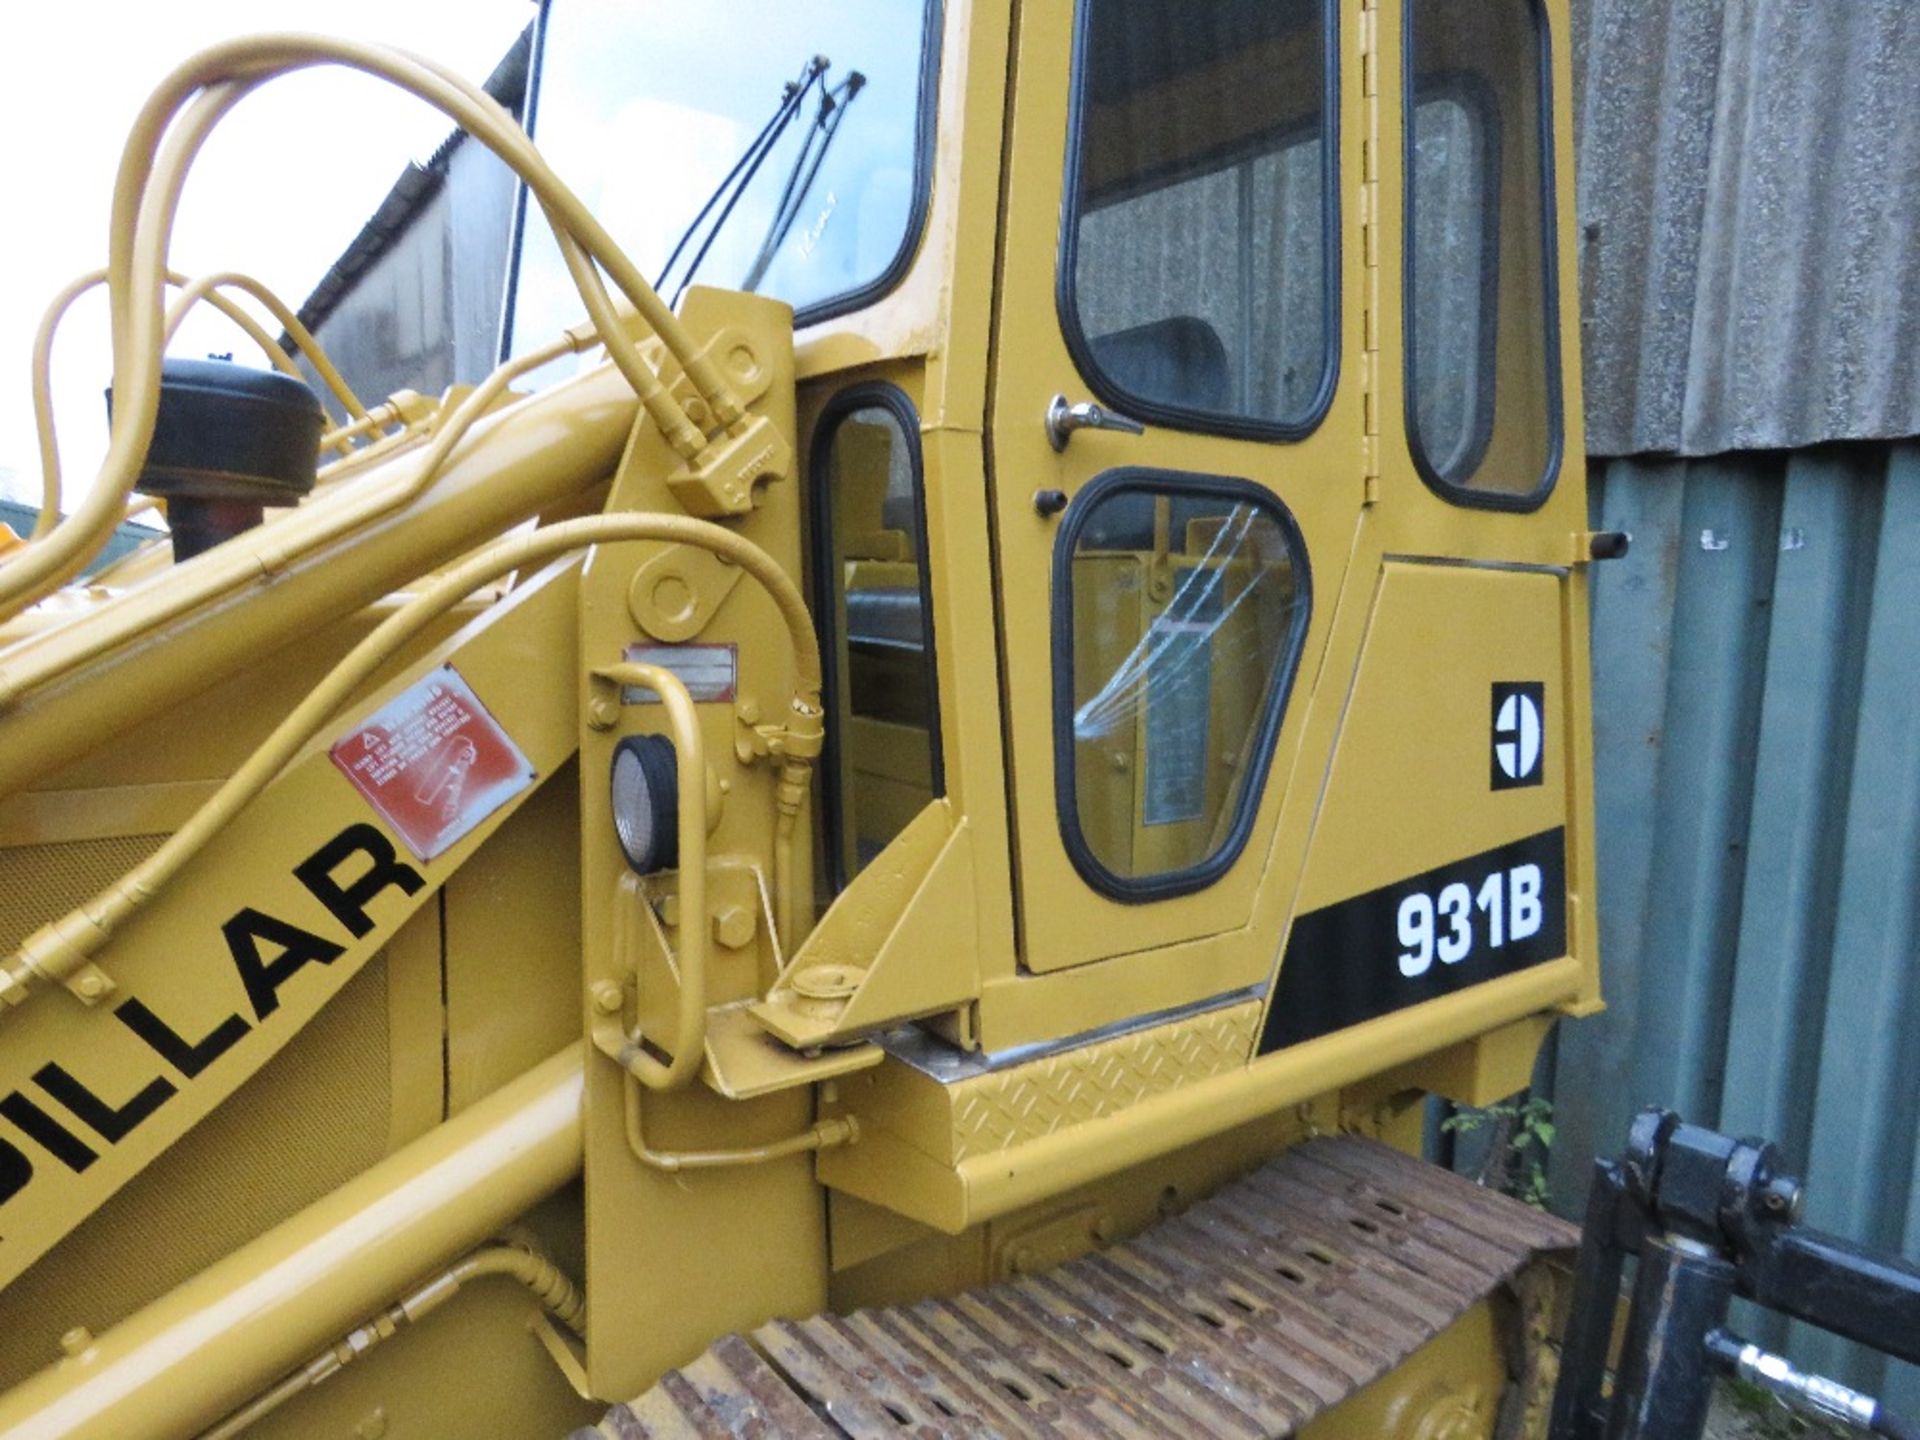 CATERPILLAR / CAT 931B TRACKED LOADING SHOVEL WITH 4 IN 1 BUCKET. SHOWING 3361 HOURS ON THE CLOCK. S - Image 4 of 8